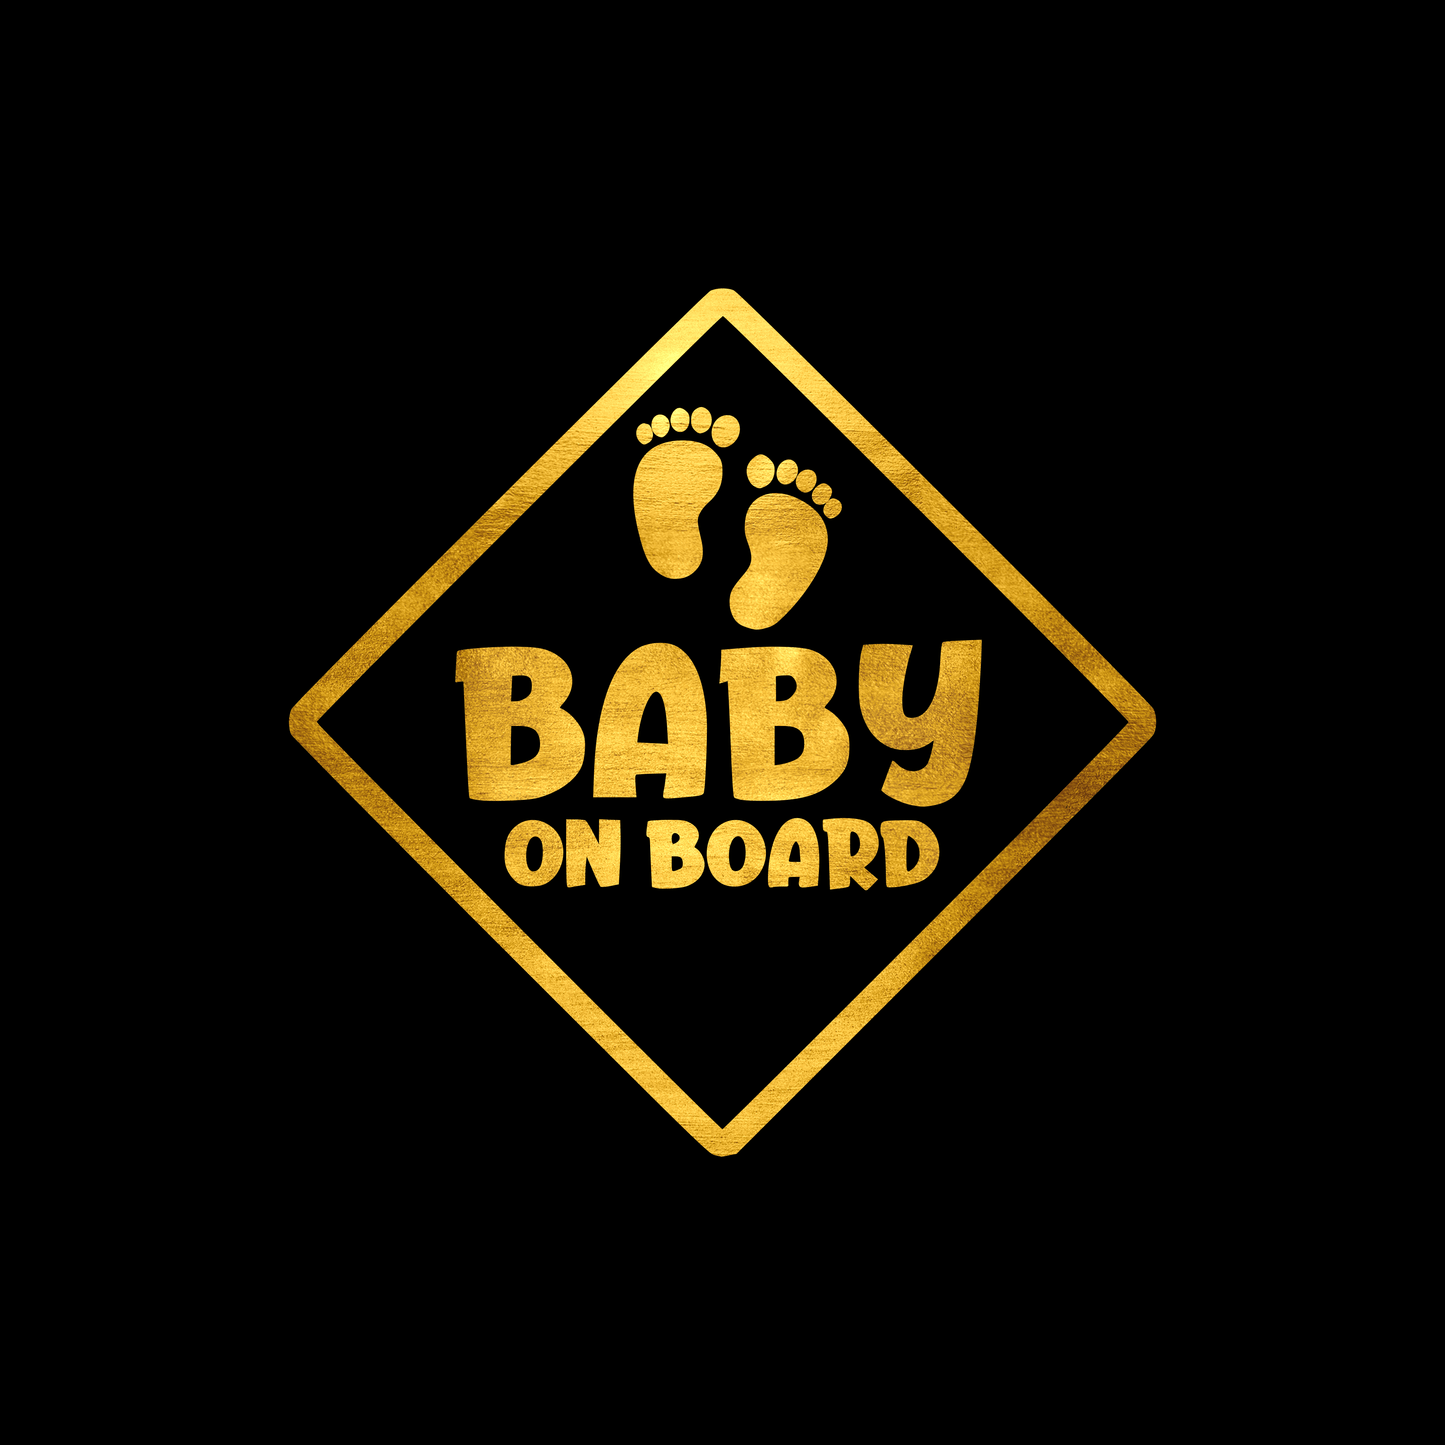 Baby on board 3 sticker decal